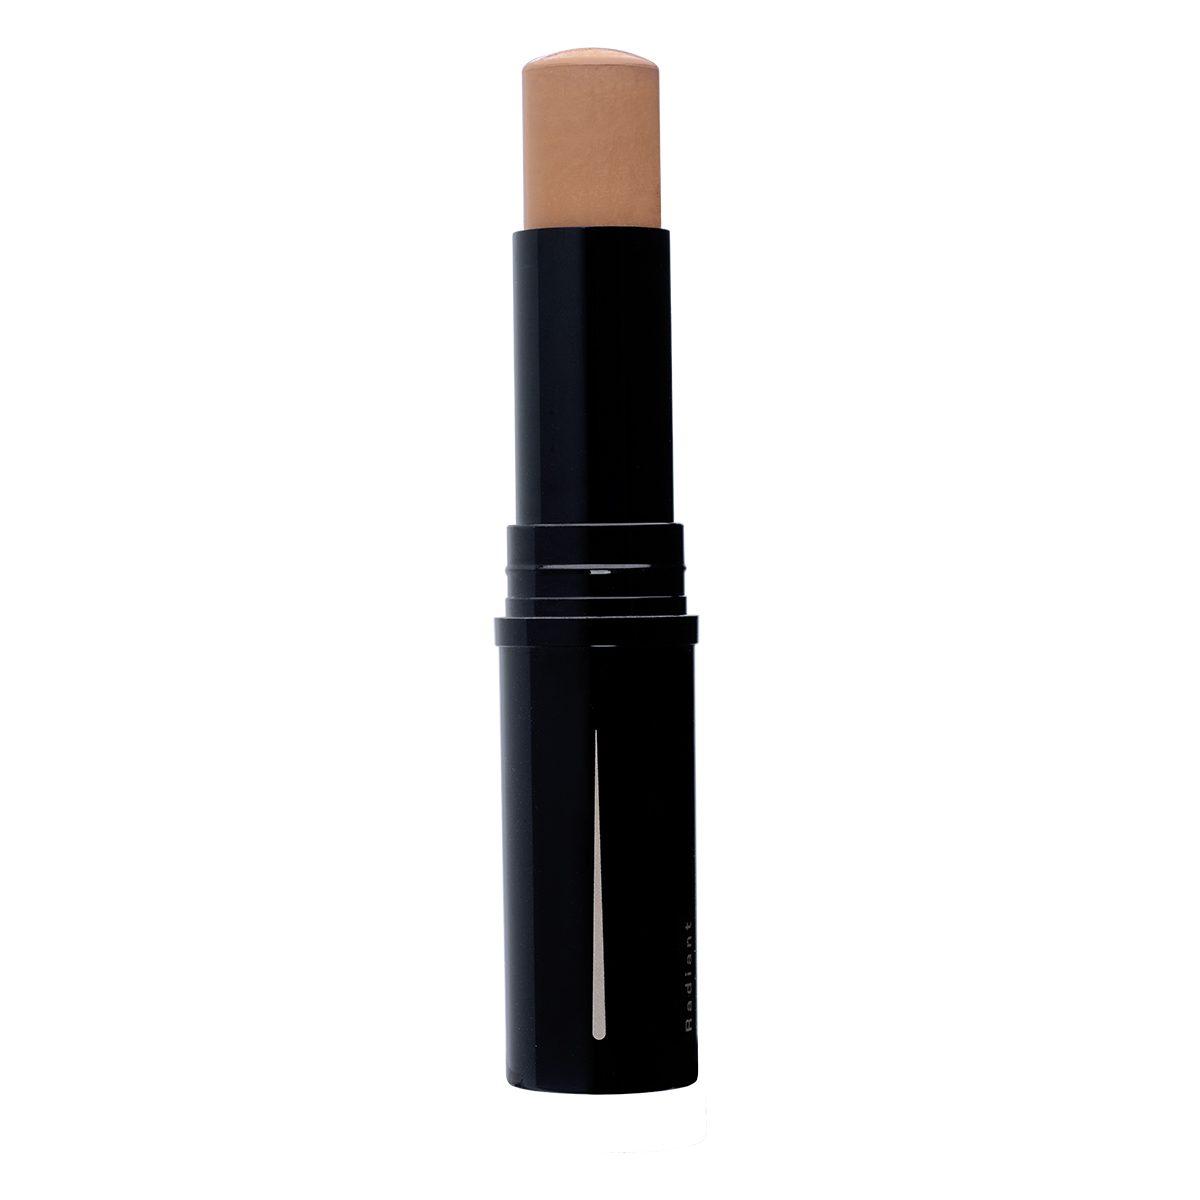 NATURAL FIX EXTRA COVERAGE STICK FOUNDATION  WATERPROOF SPF 15 (04 PEANUT)